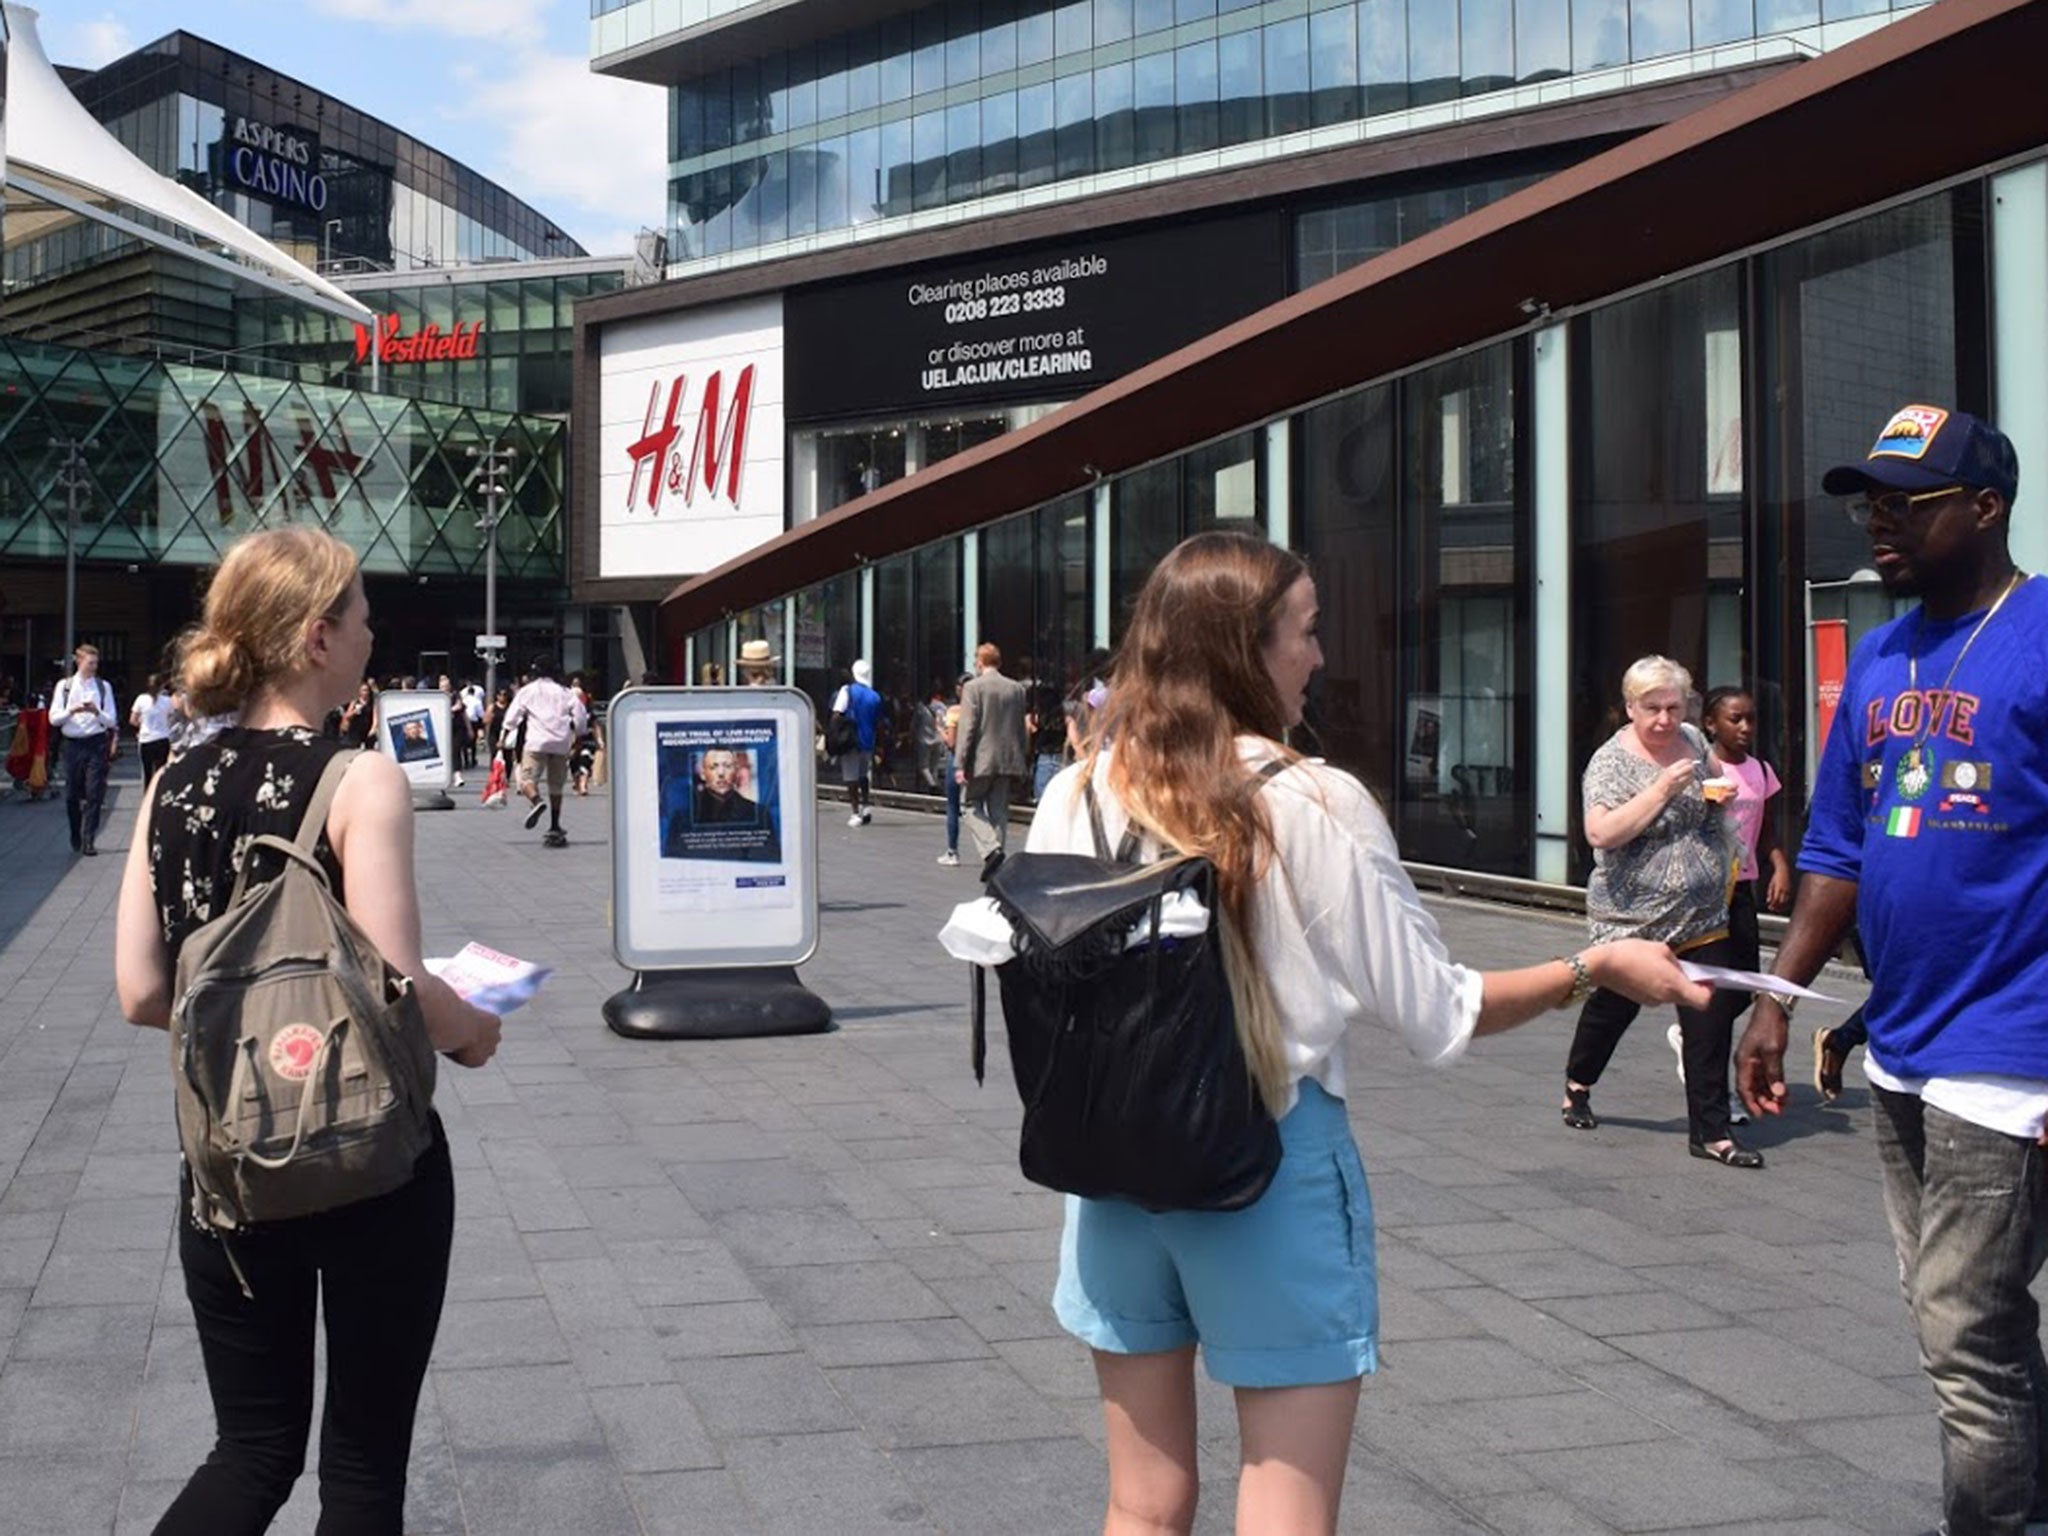 Members of Big Brother Watch hand out leaflets during a Metropolitan Police trial of facial recognition in Stratford, London, on 26 July